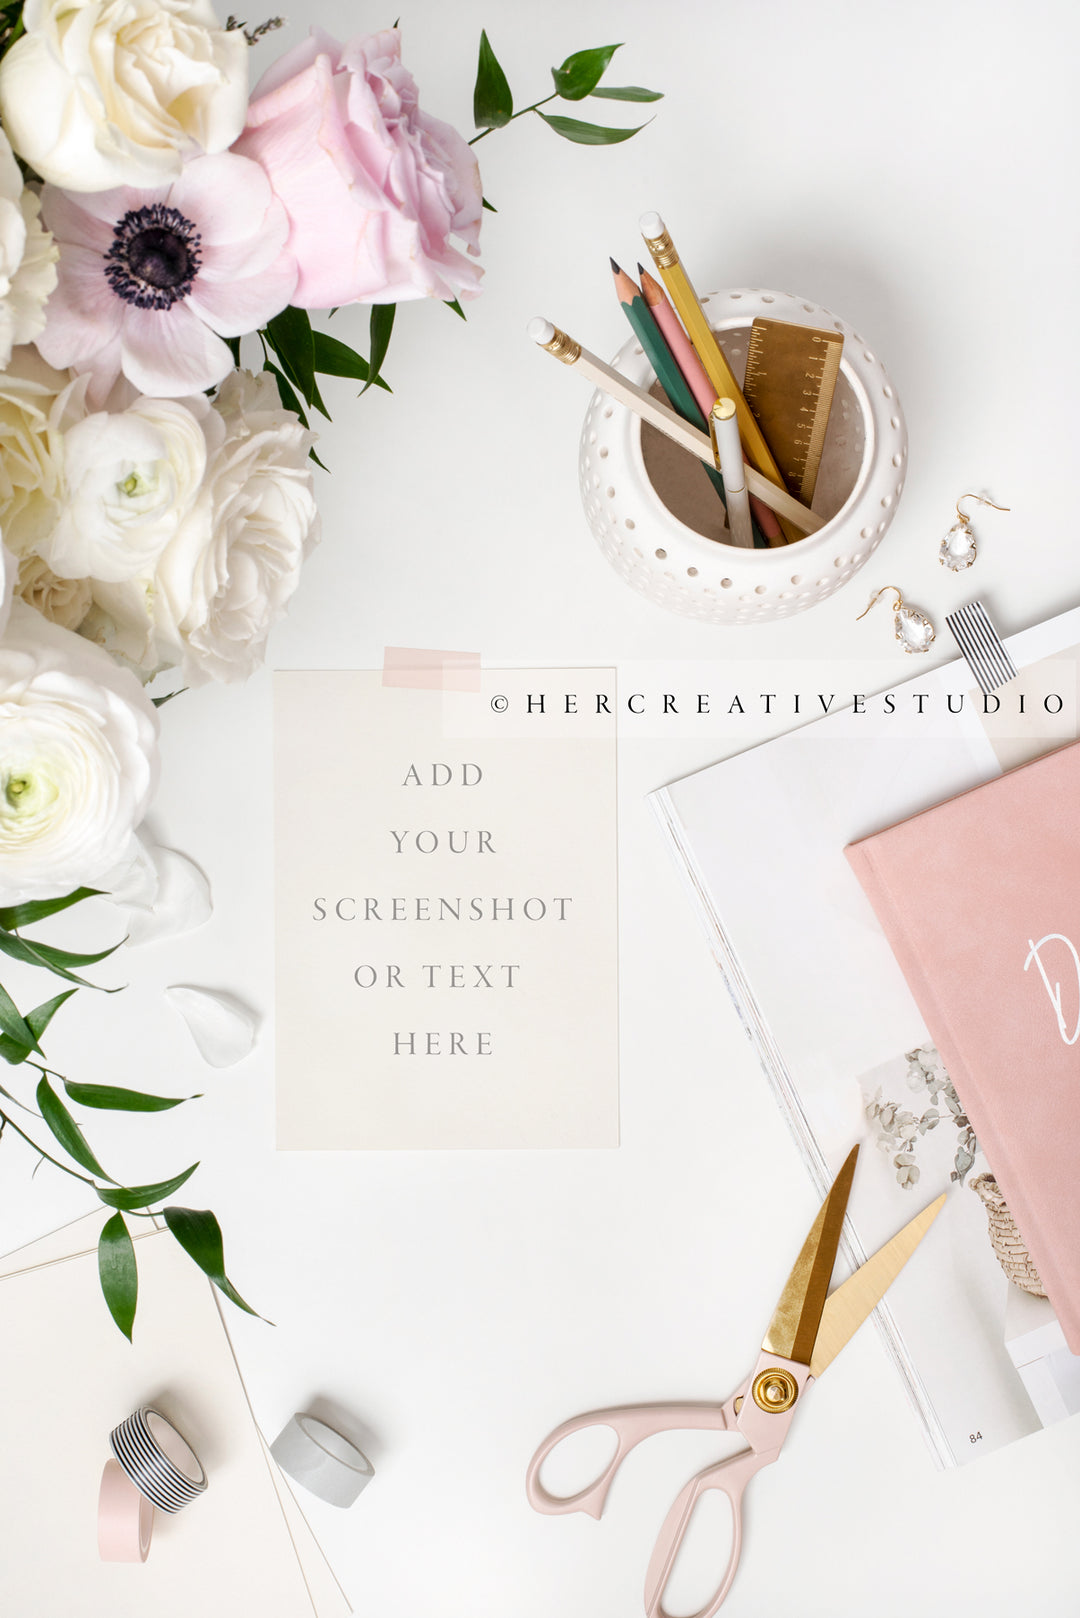 Stationery, Flowers & Scissors on Pretty Workspace, Styled Stock Image